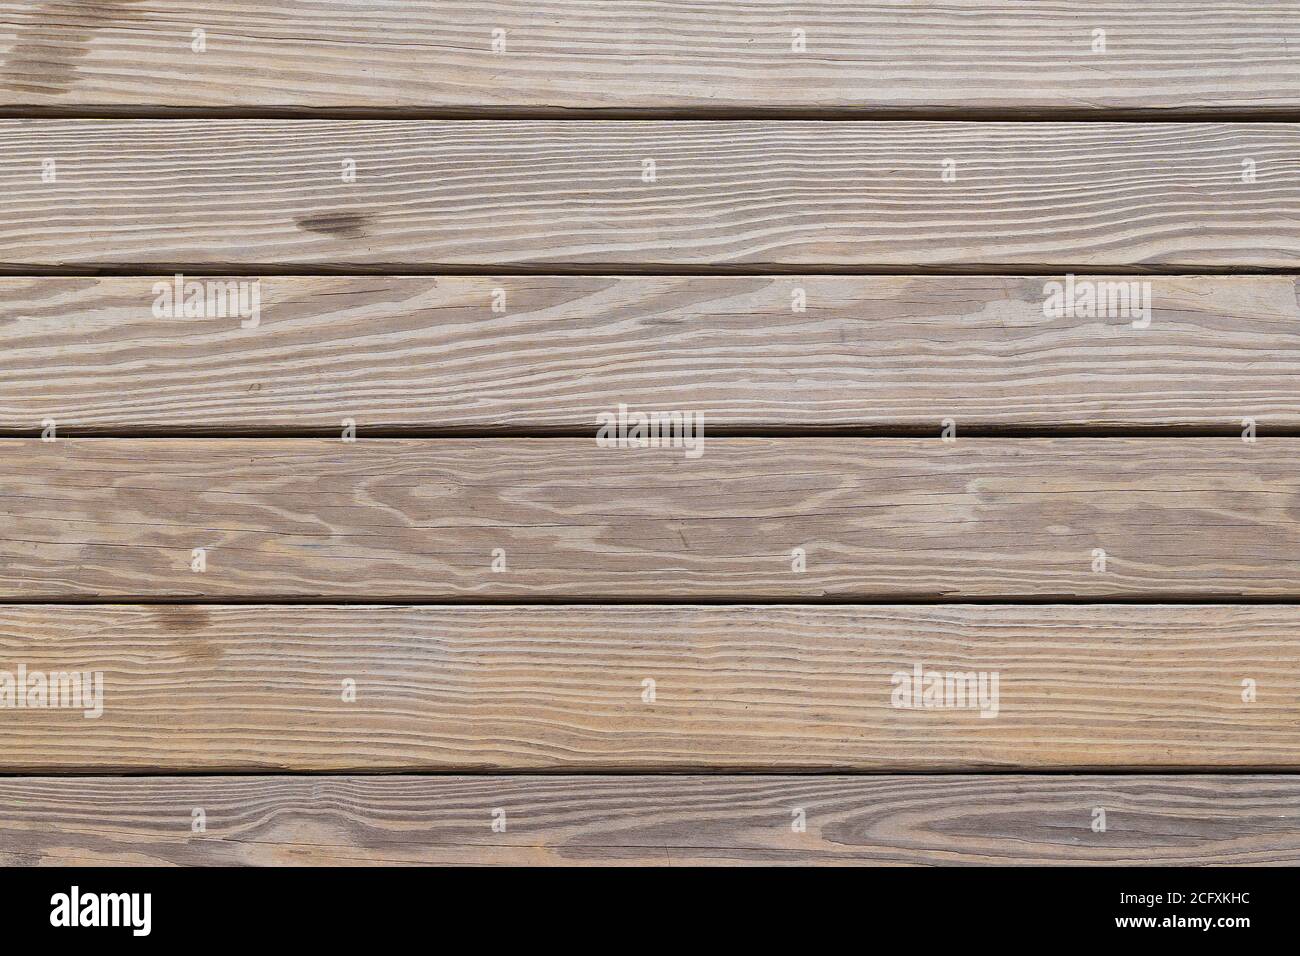 Close up. Old exterior wooden decking or flooring on the terrace. Stock Photo